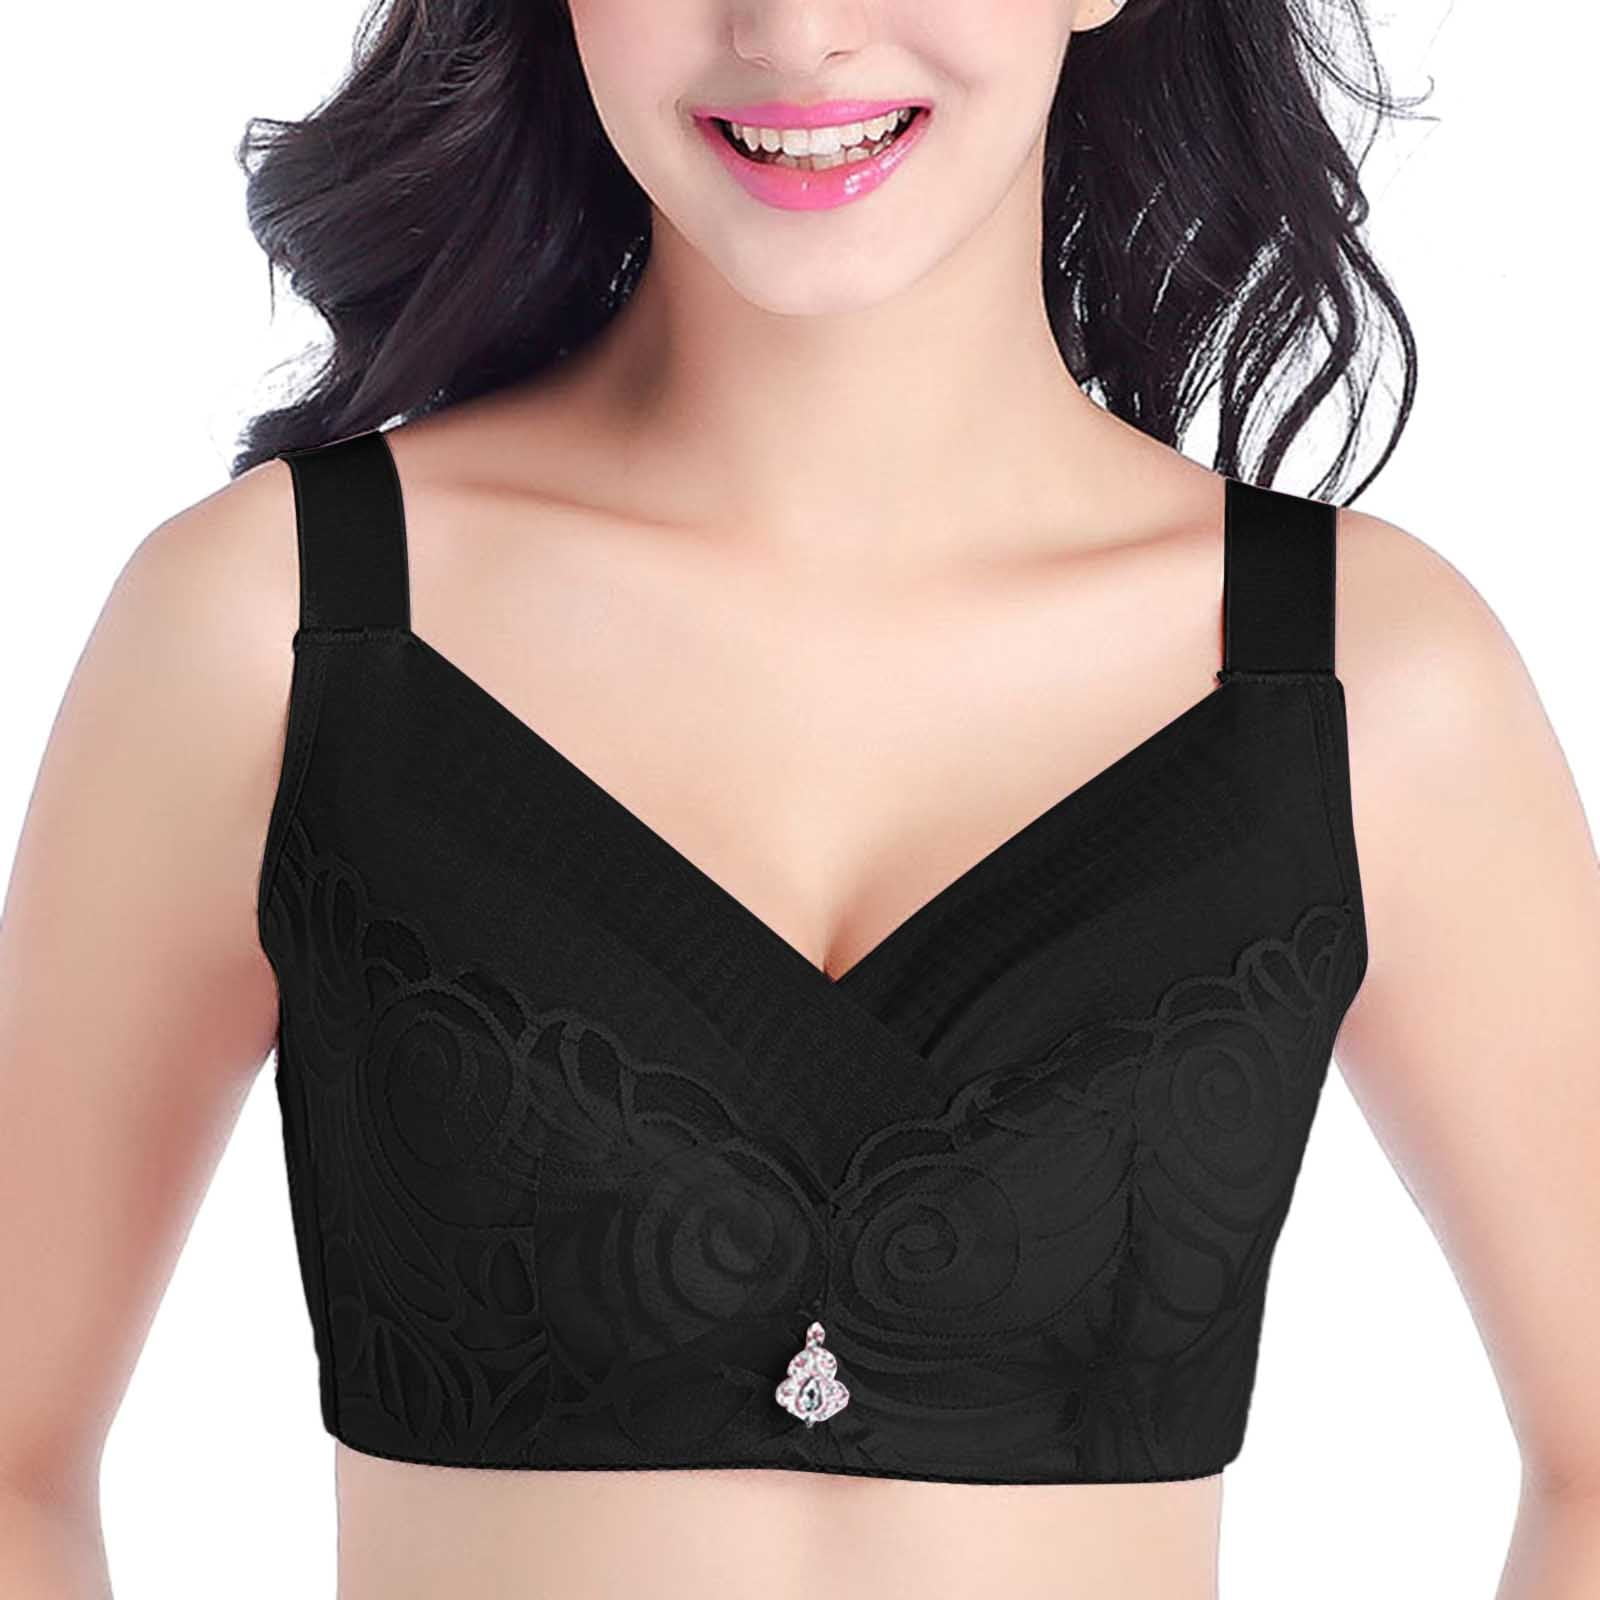 LEEy-World Lingerie for Women Naughty Women's Easy Does It Underarm  Smoothing with Seamless Stretch Wireless Lightly Lined Comfort Bra Black,XL  